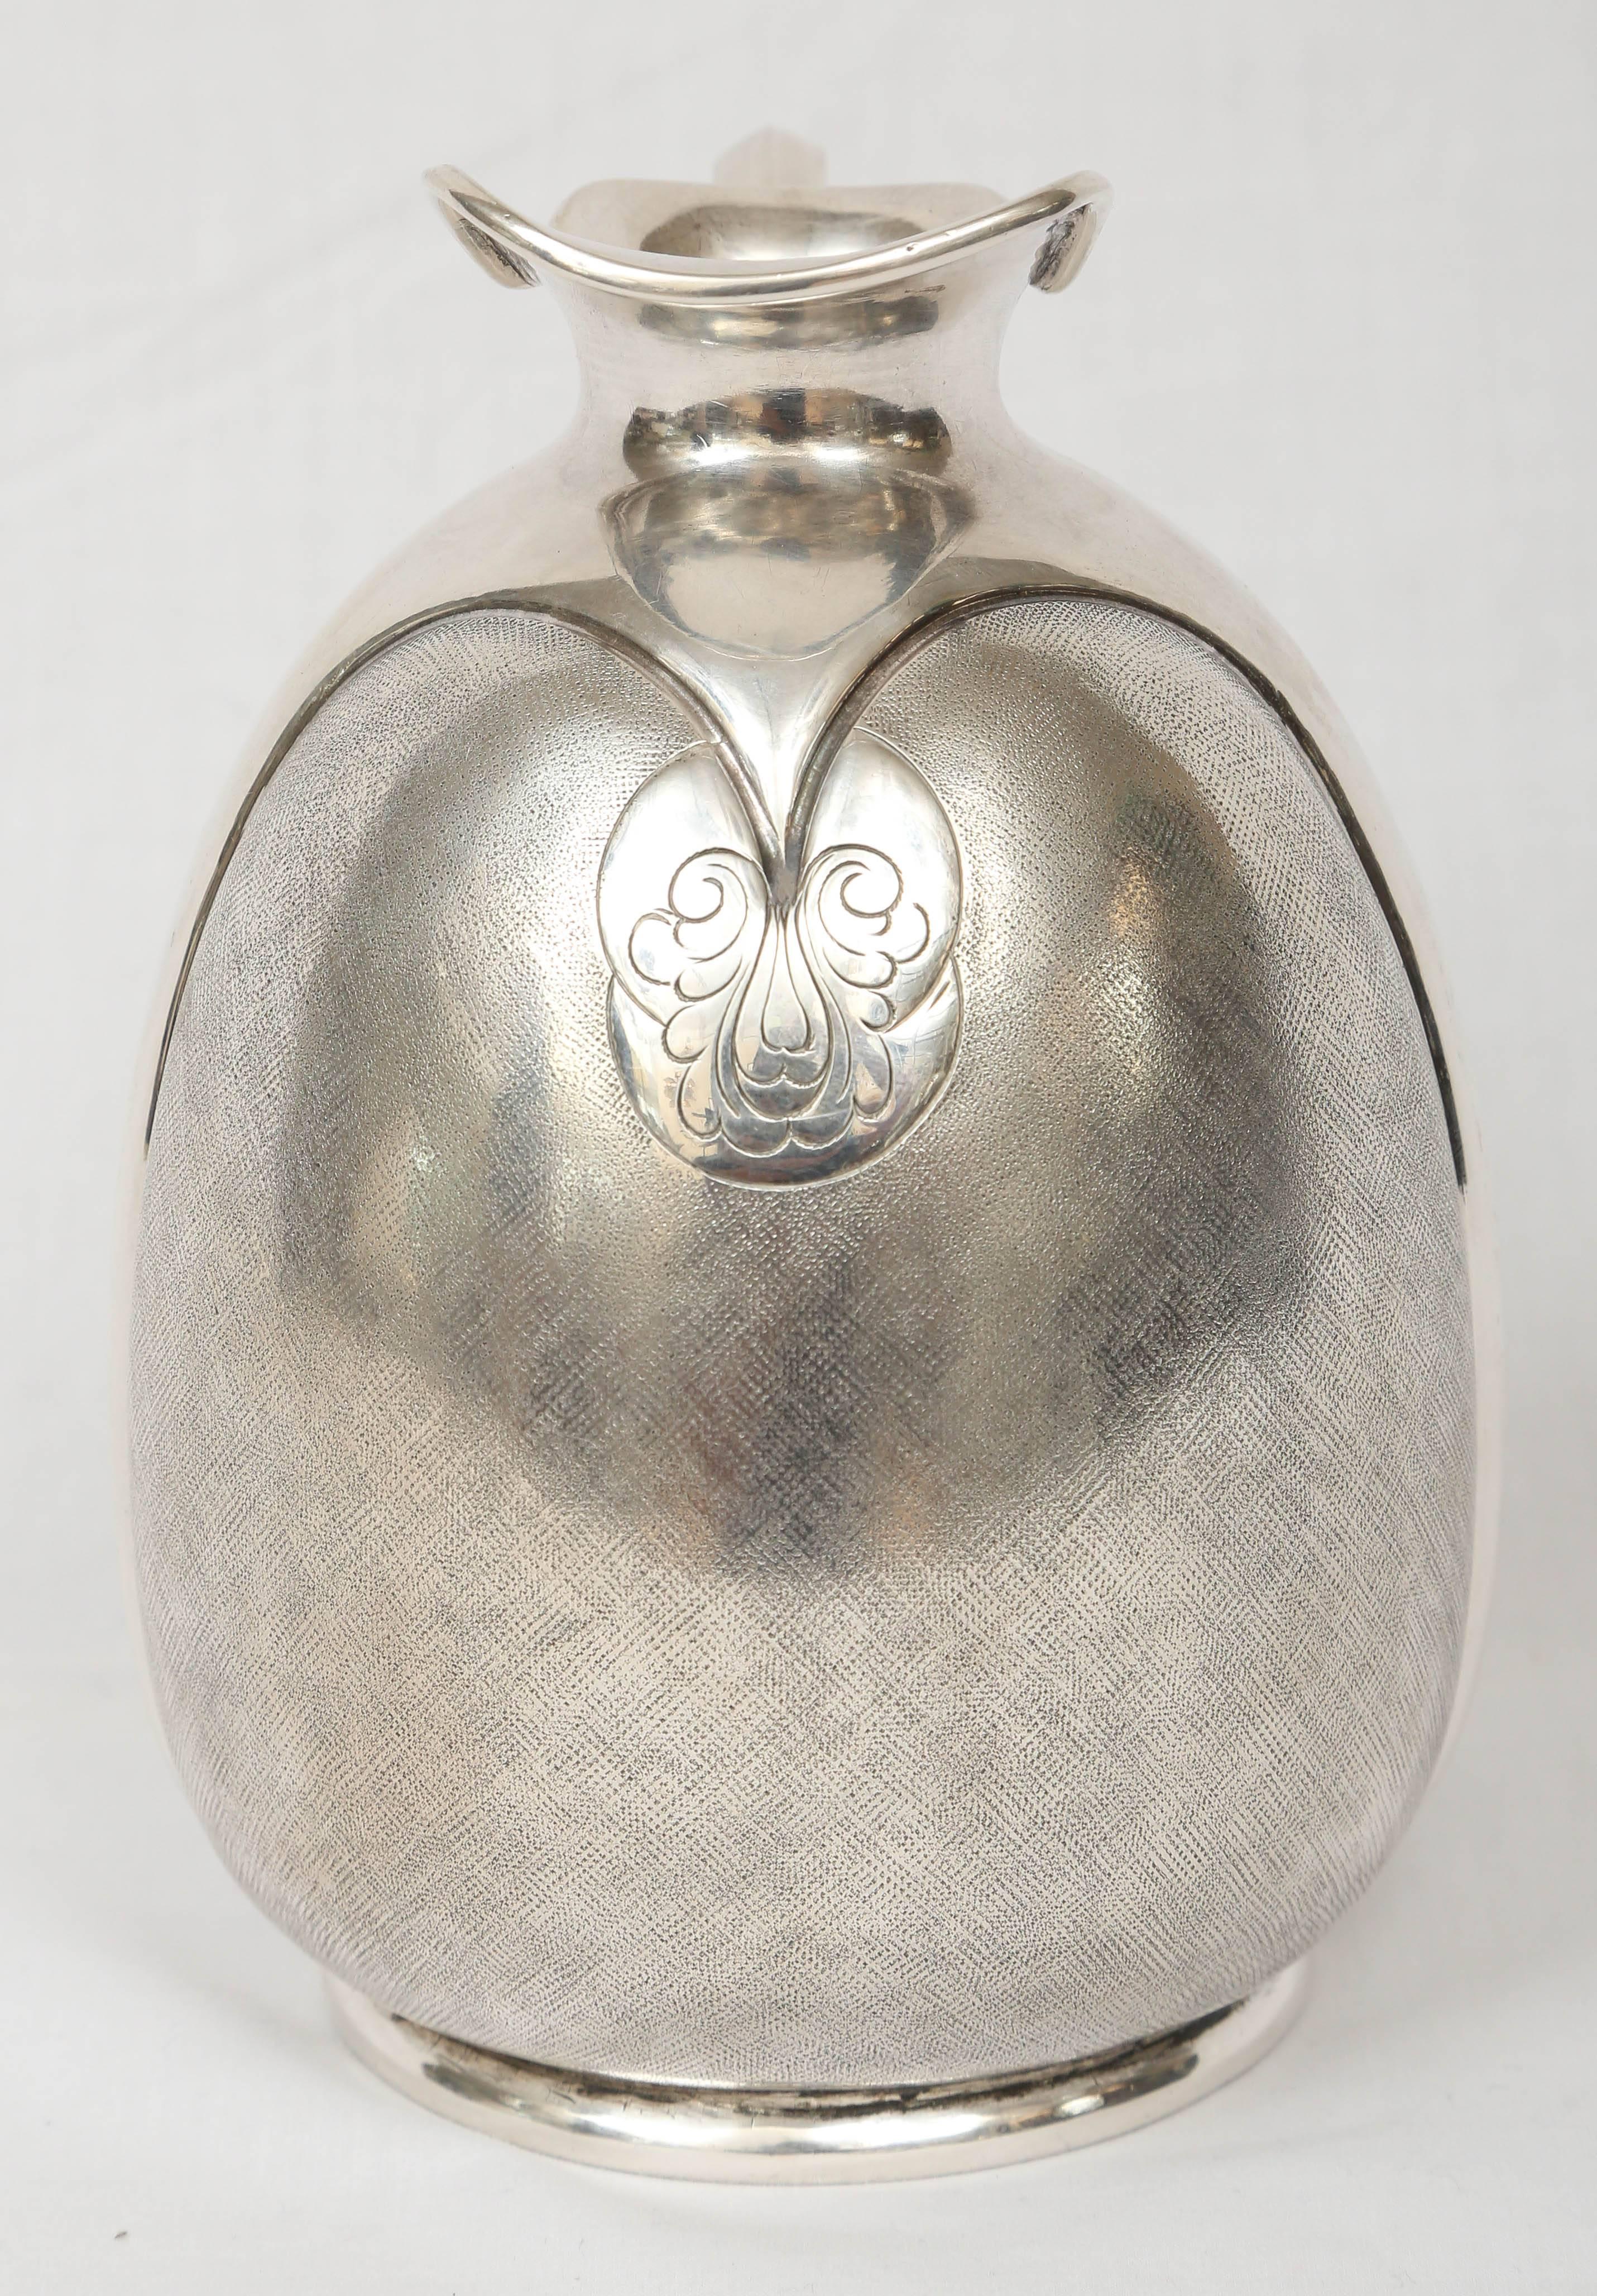 Italian Silver Vase by Fratelli Cacchione from Milan, Italy